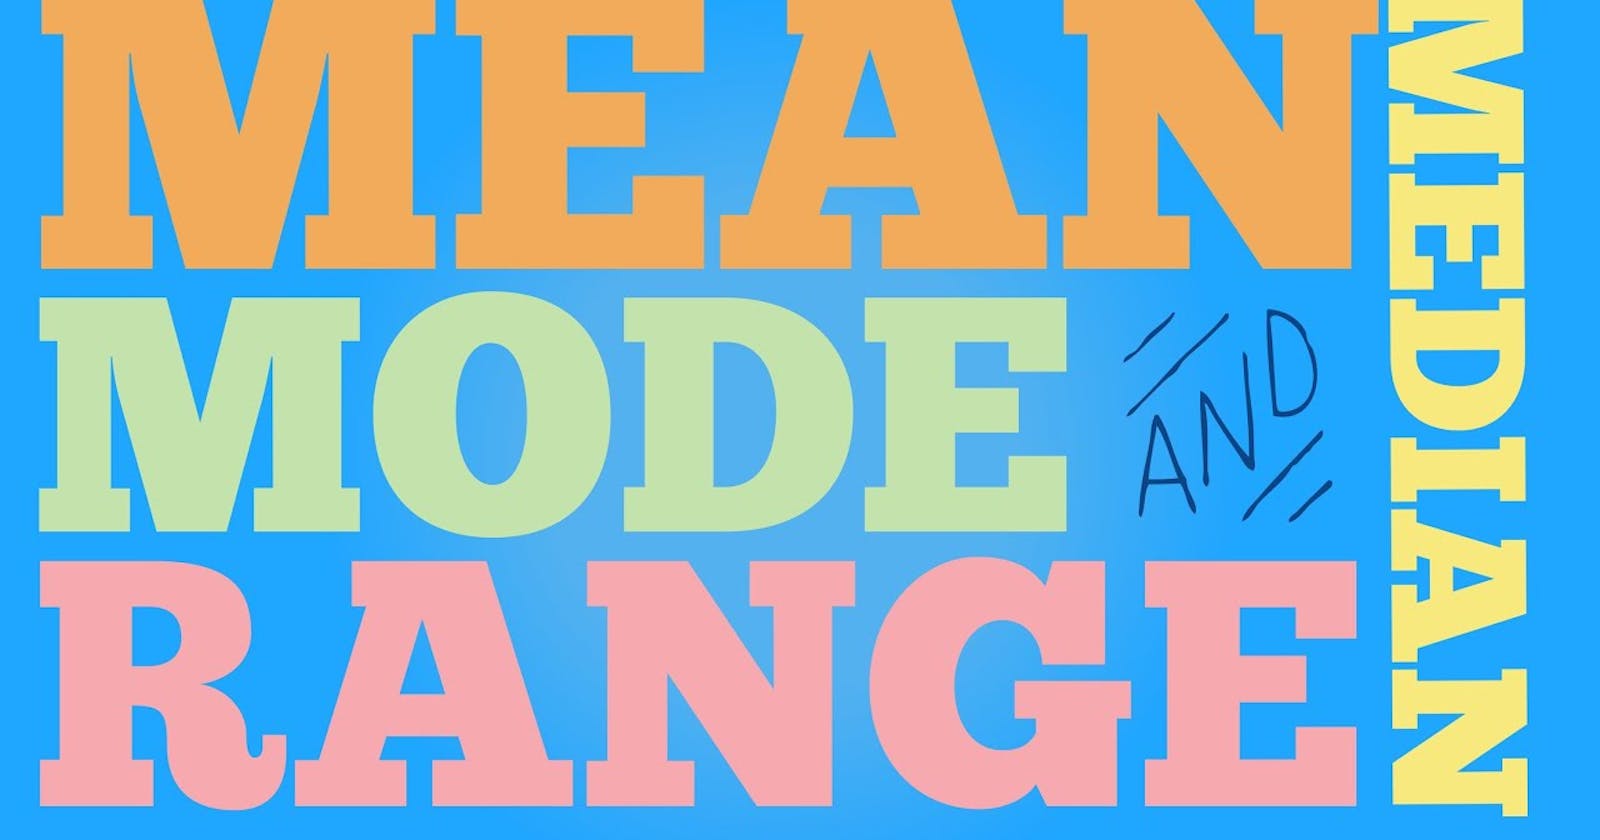 All about Mean, Median, and Mode